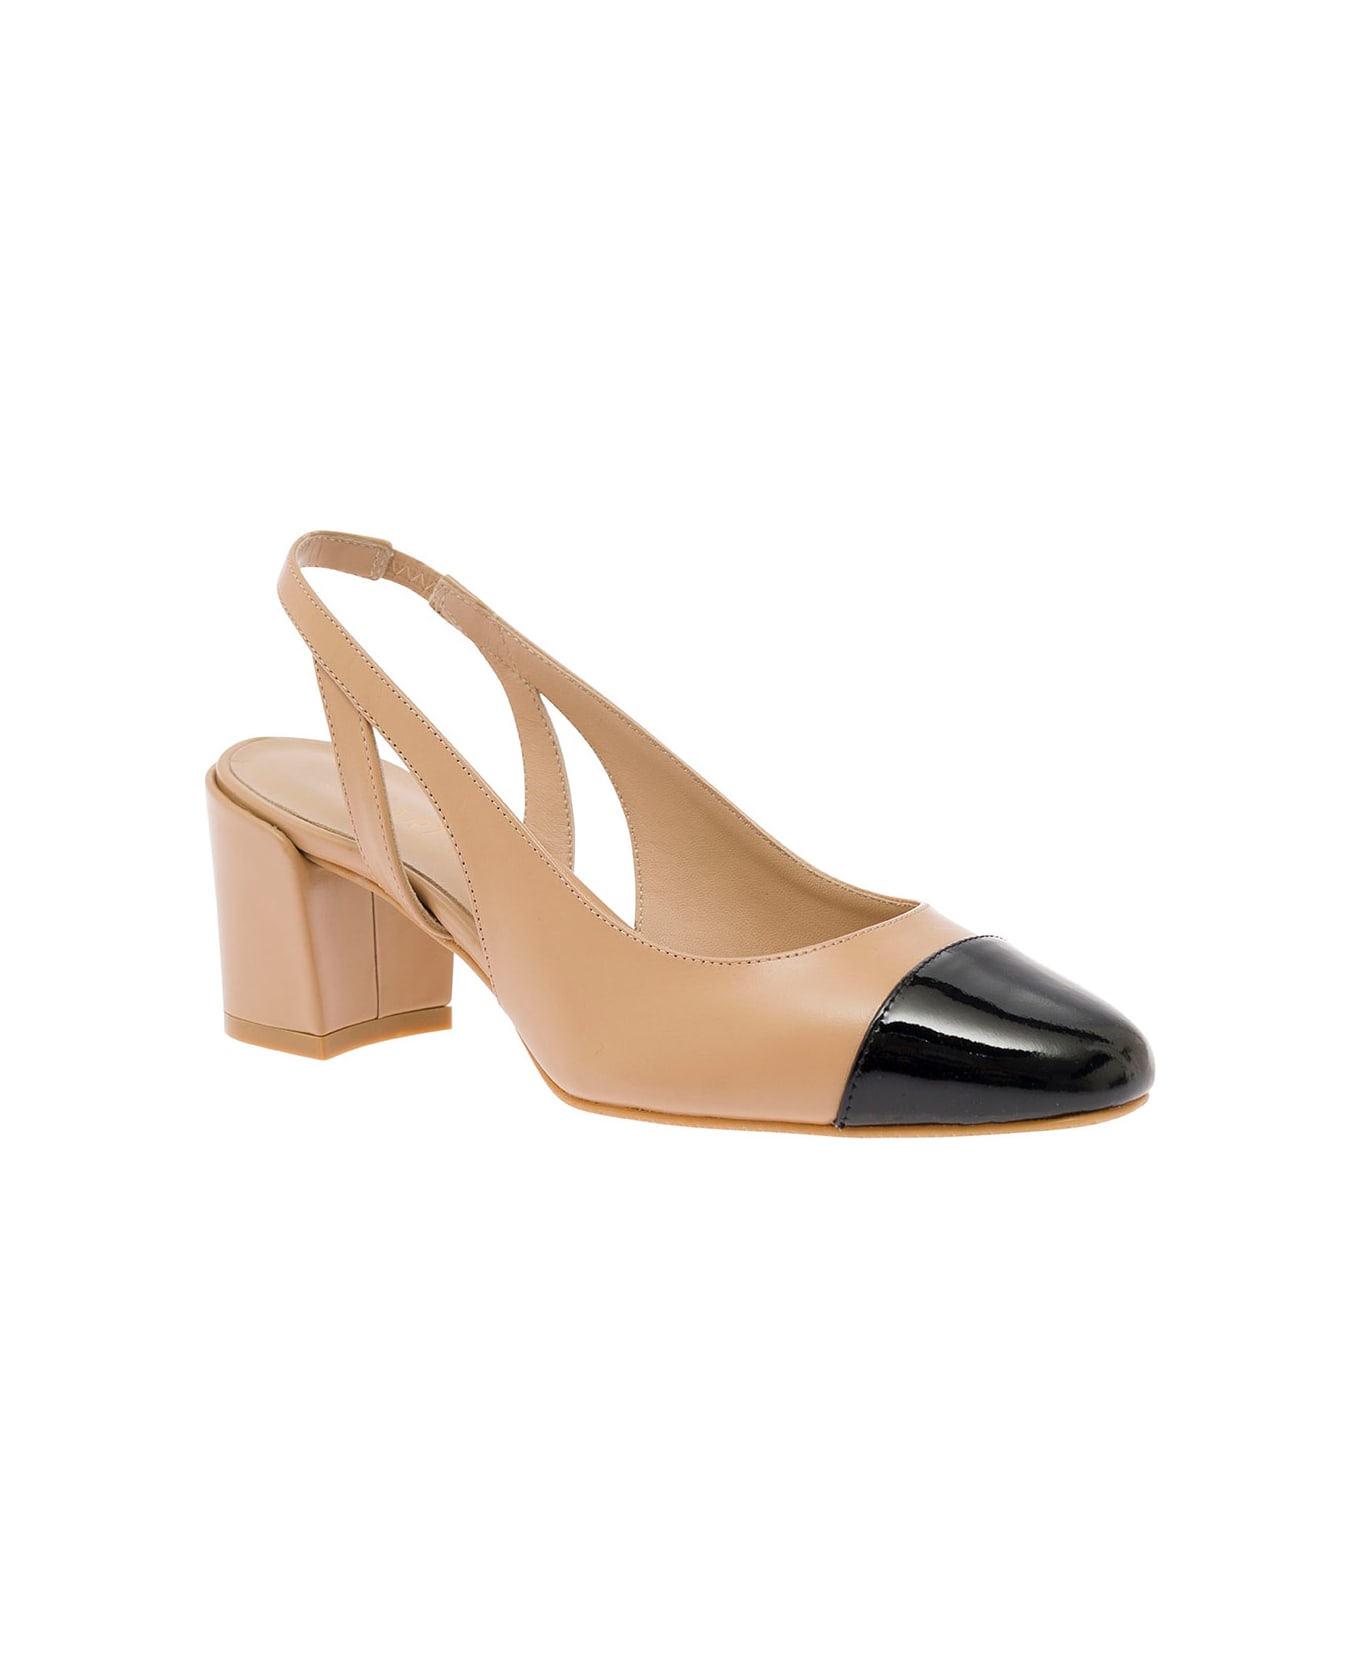 Stuart Weitzman Beige Slingback With Contrasting Toe In Smooth Leather Woman - Beige ハイヒール